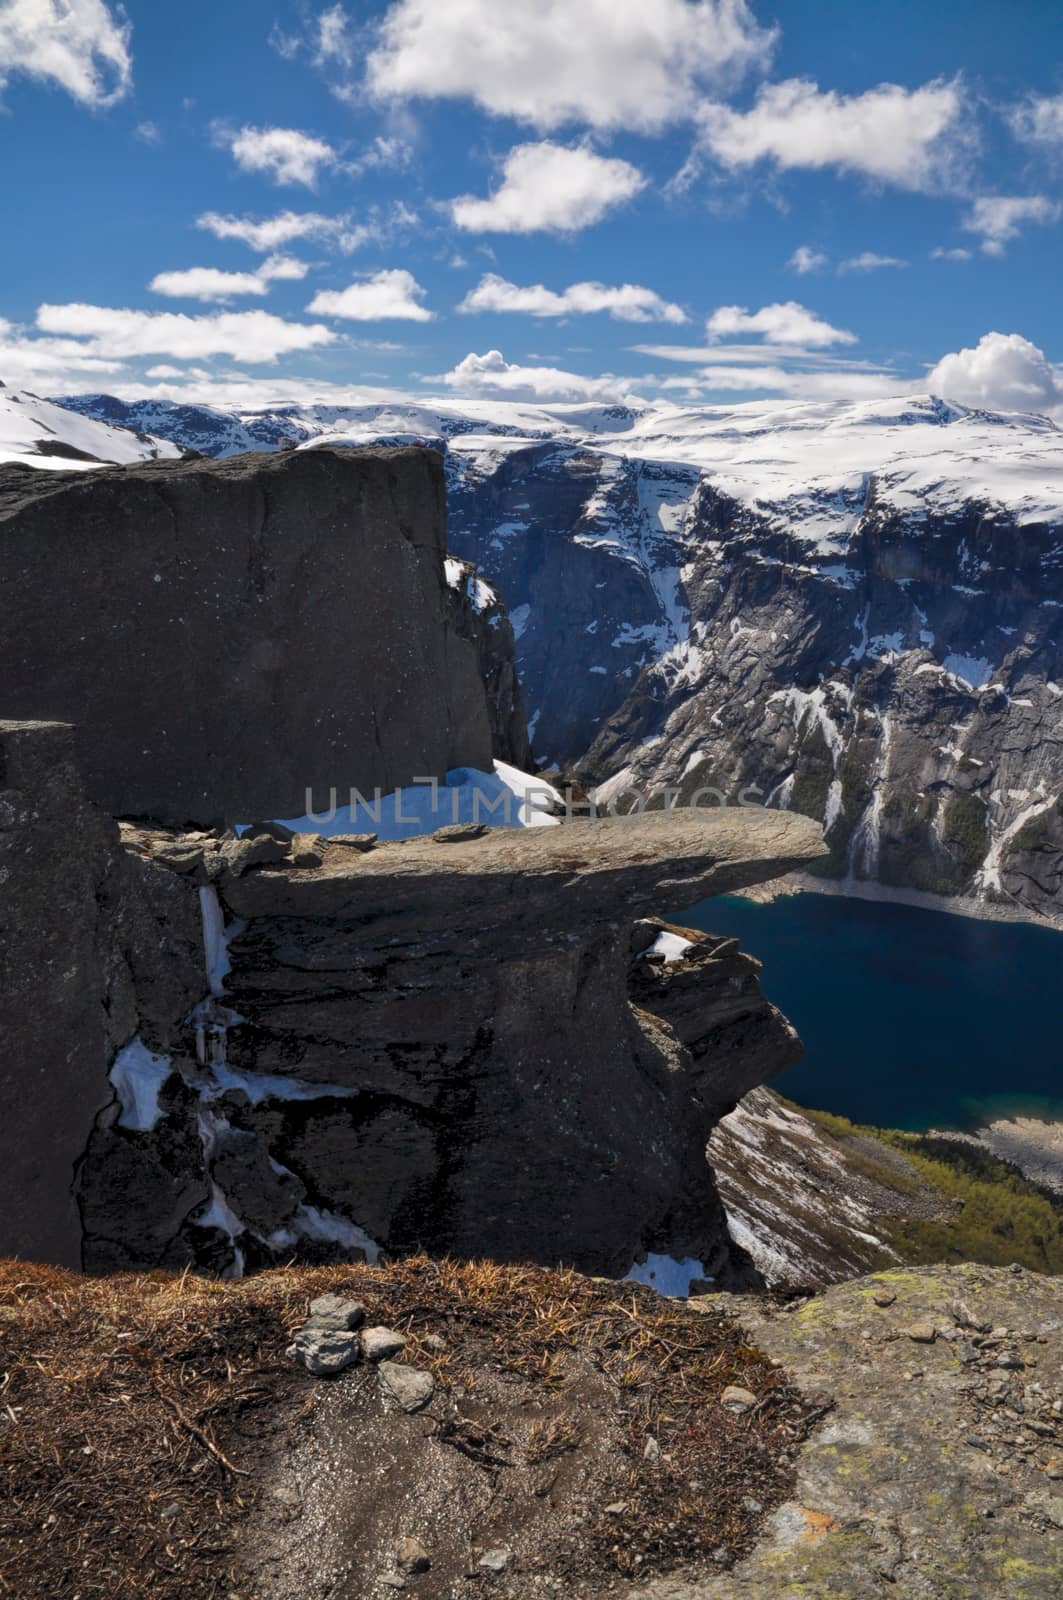 Side view of the whole Trolltunga rock sticking out of the mountain in Norway